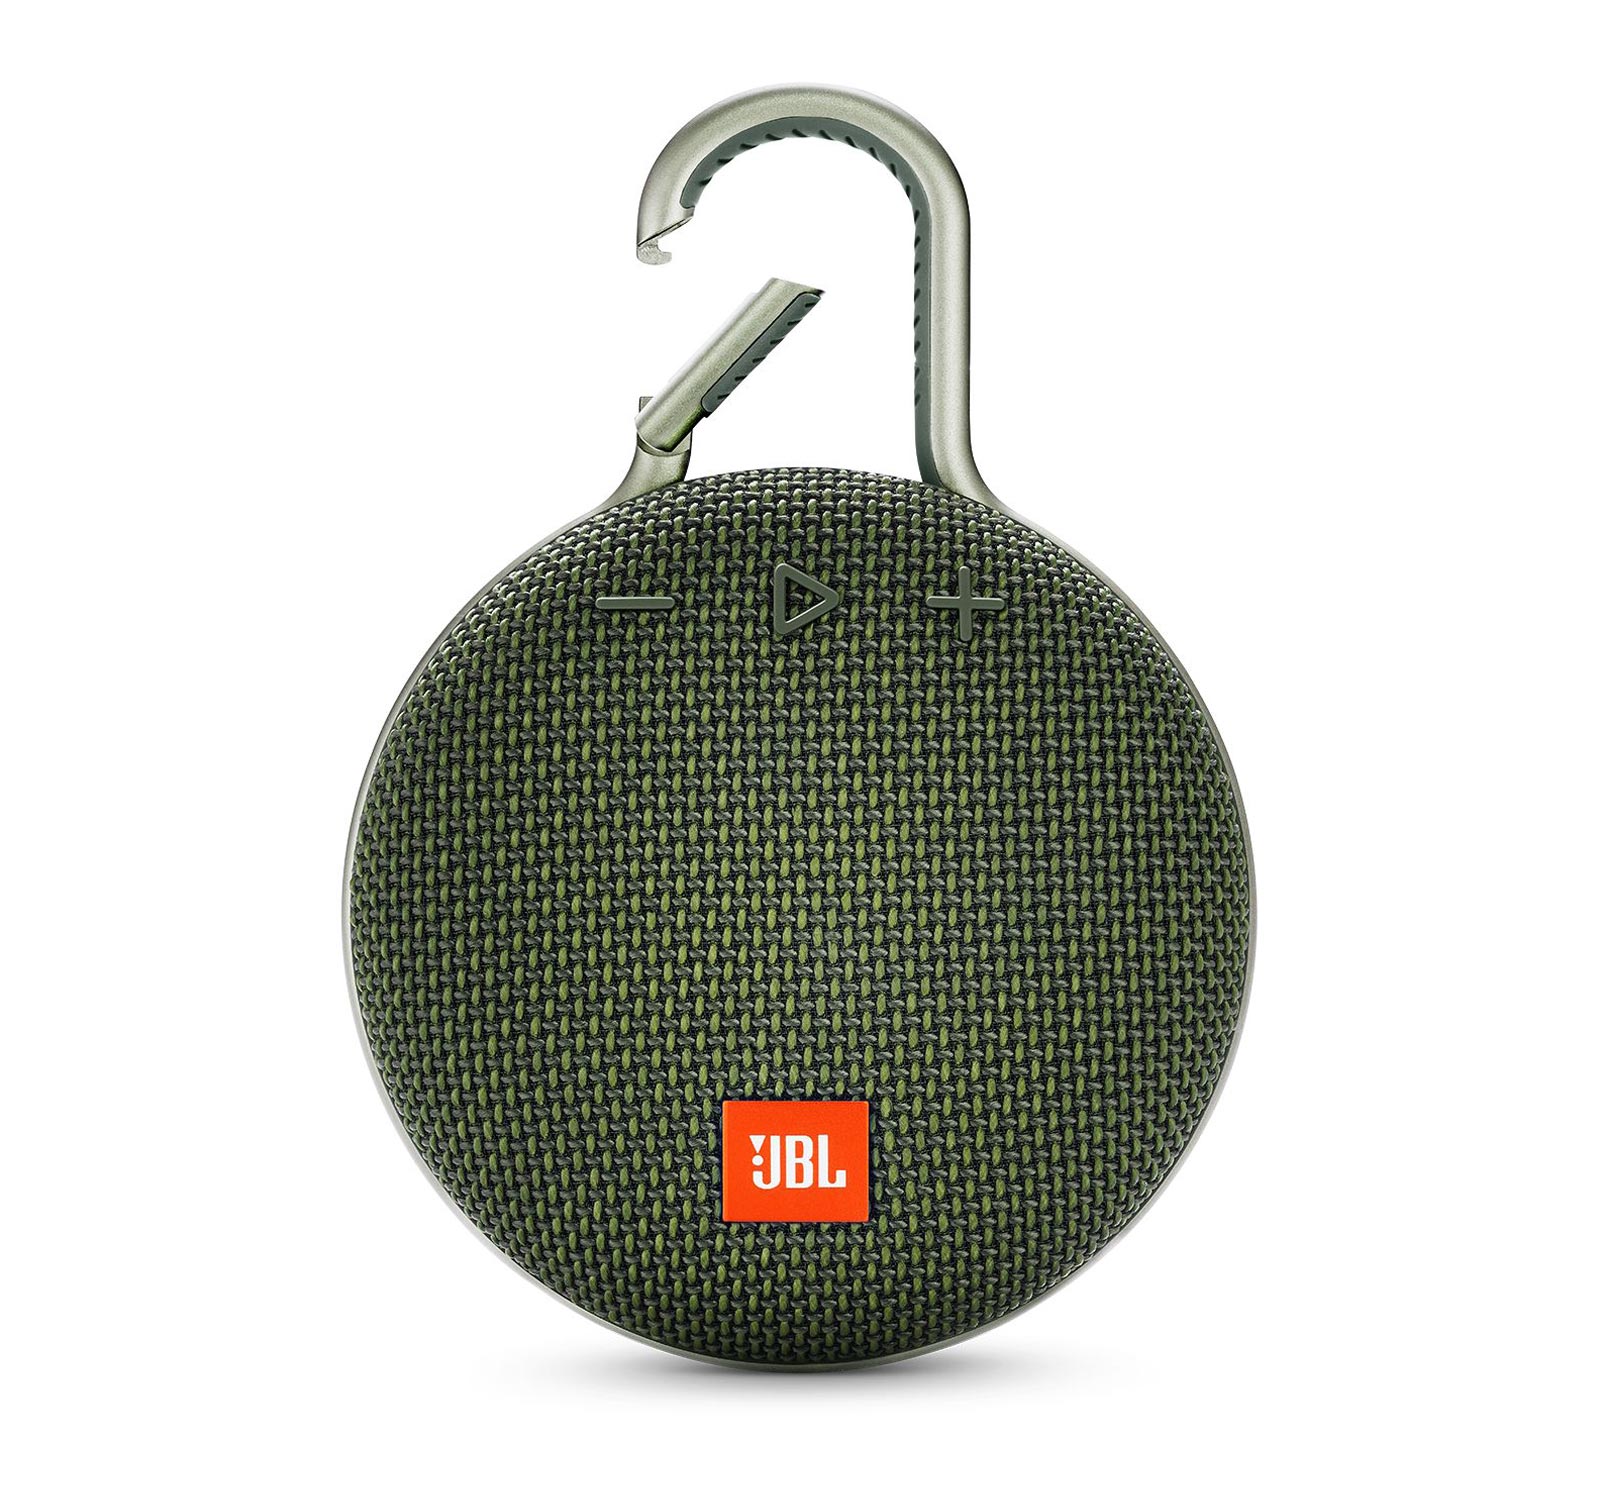 JBL Clip 3 Portable Bluetooth Speaker with Carabiner - Green - image 1 of 4